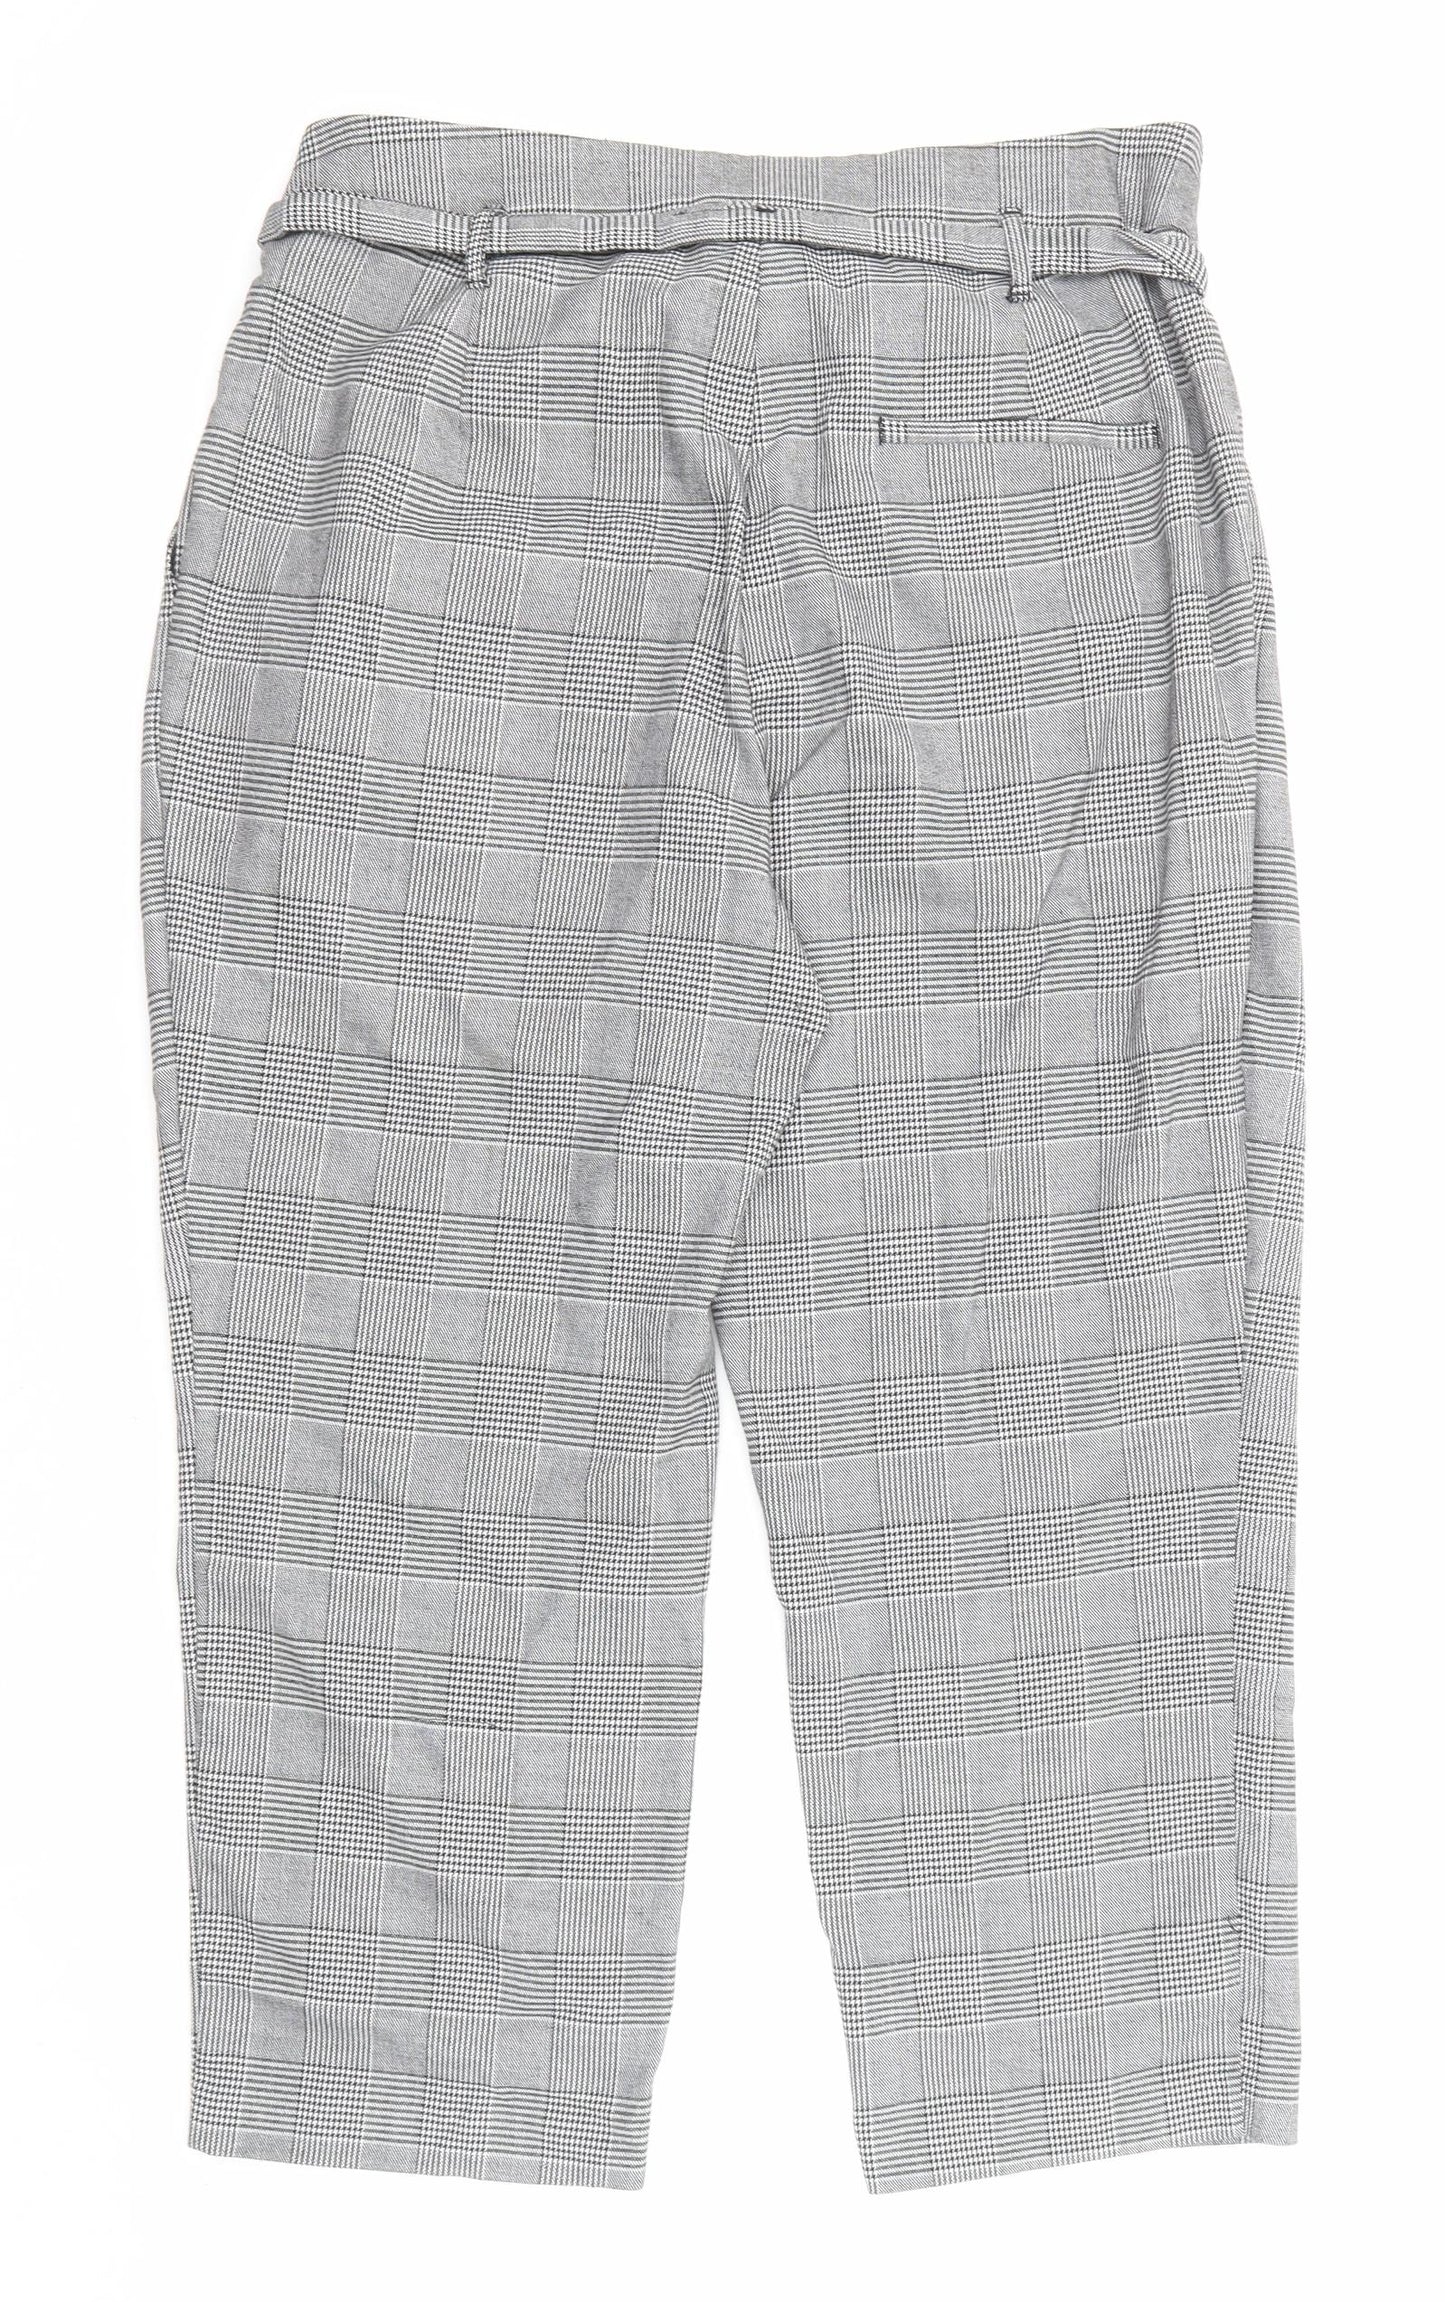 New Look Womens Grey Check Polyester Carrot Trousers Size 16 L23 in Regular Zip